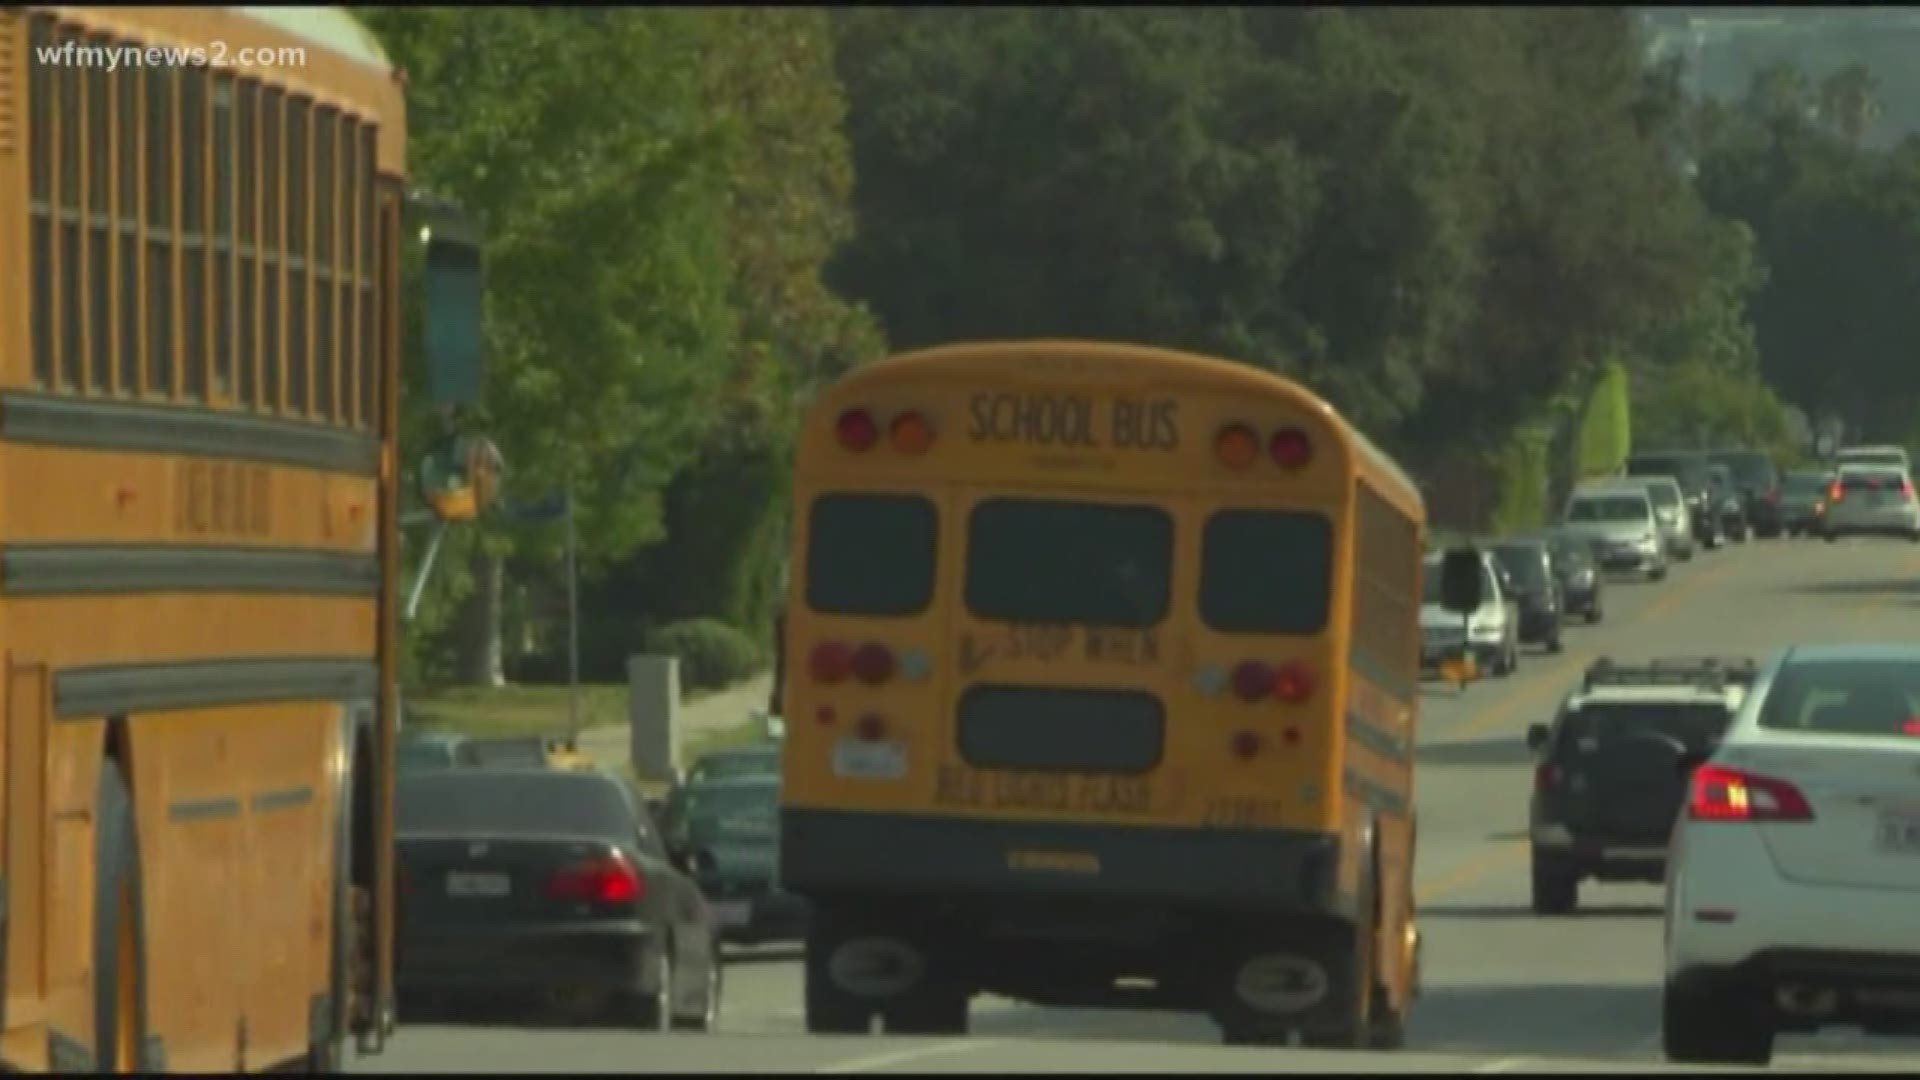 Guilford County Schools' transportation director says they still need 27 more to have full staff of bus drivers. He says the start of school year could mean late students during the first week.